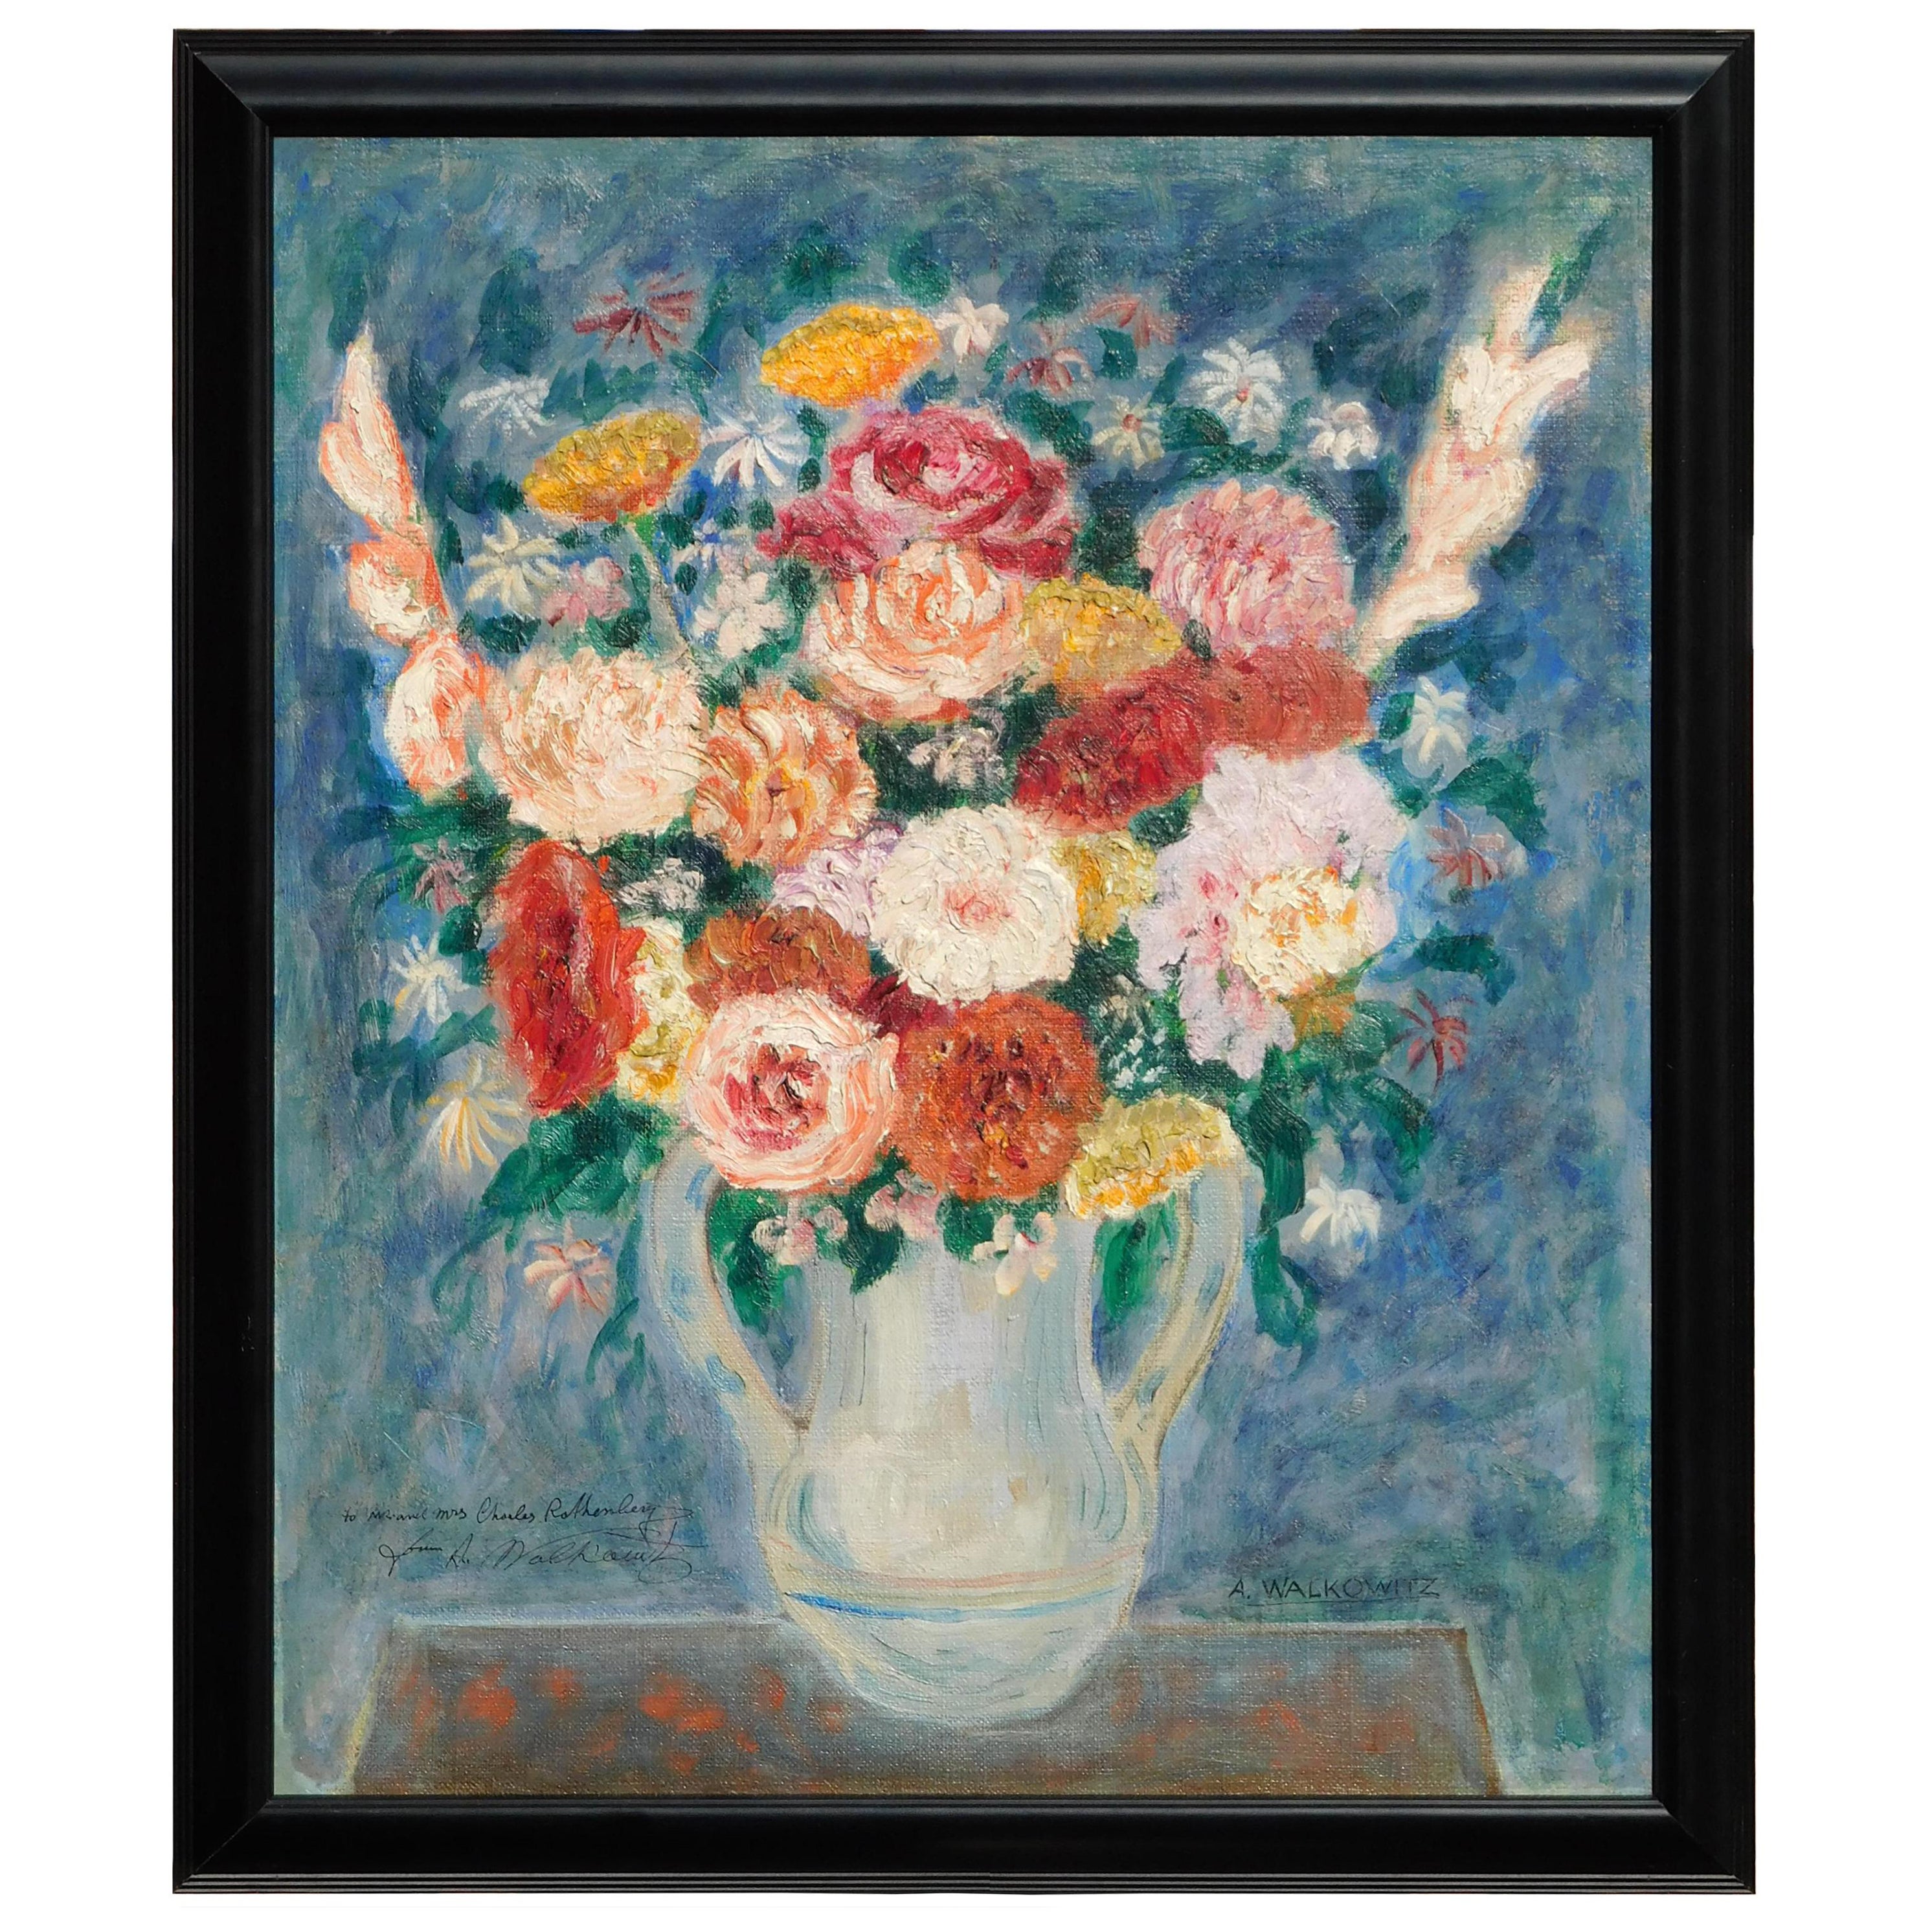 Abraham Walkowitz Modernist Floral Still-Life Painting, circa 1915-1920 For Sale